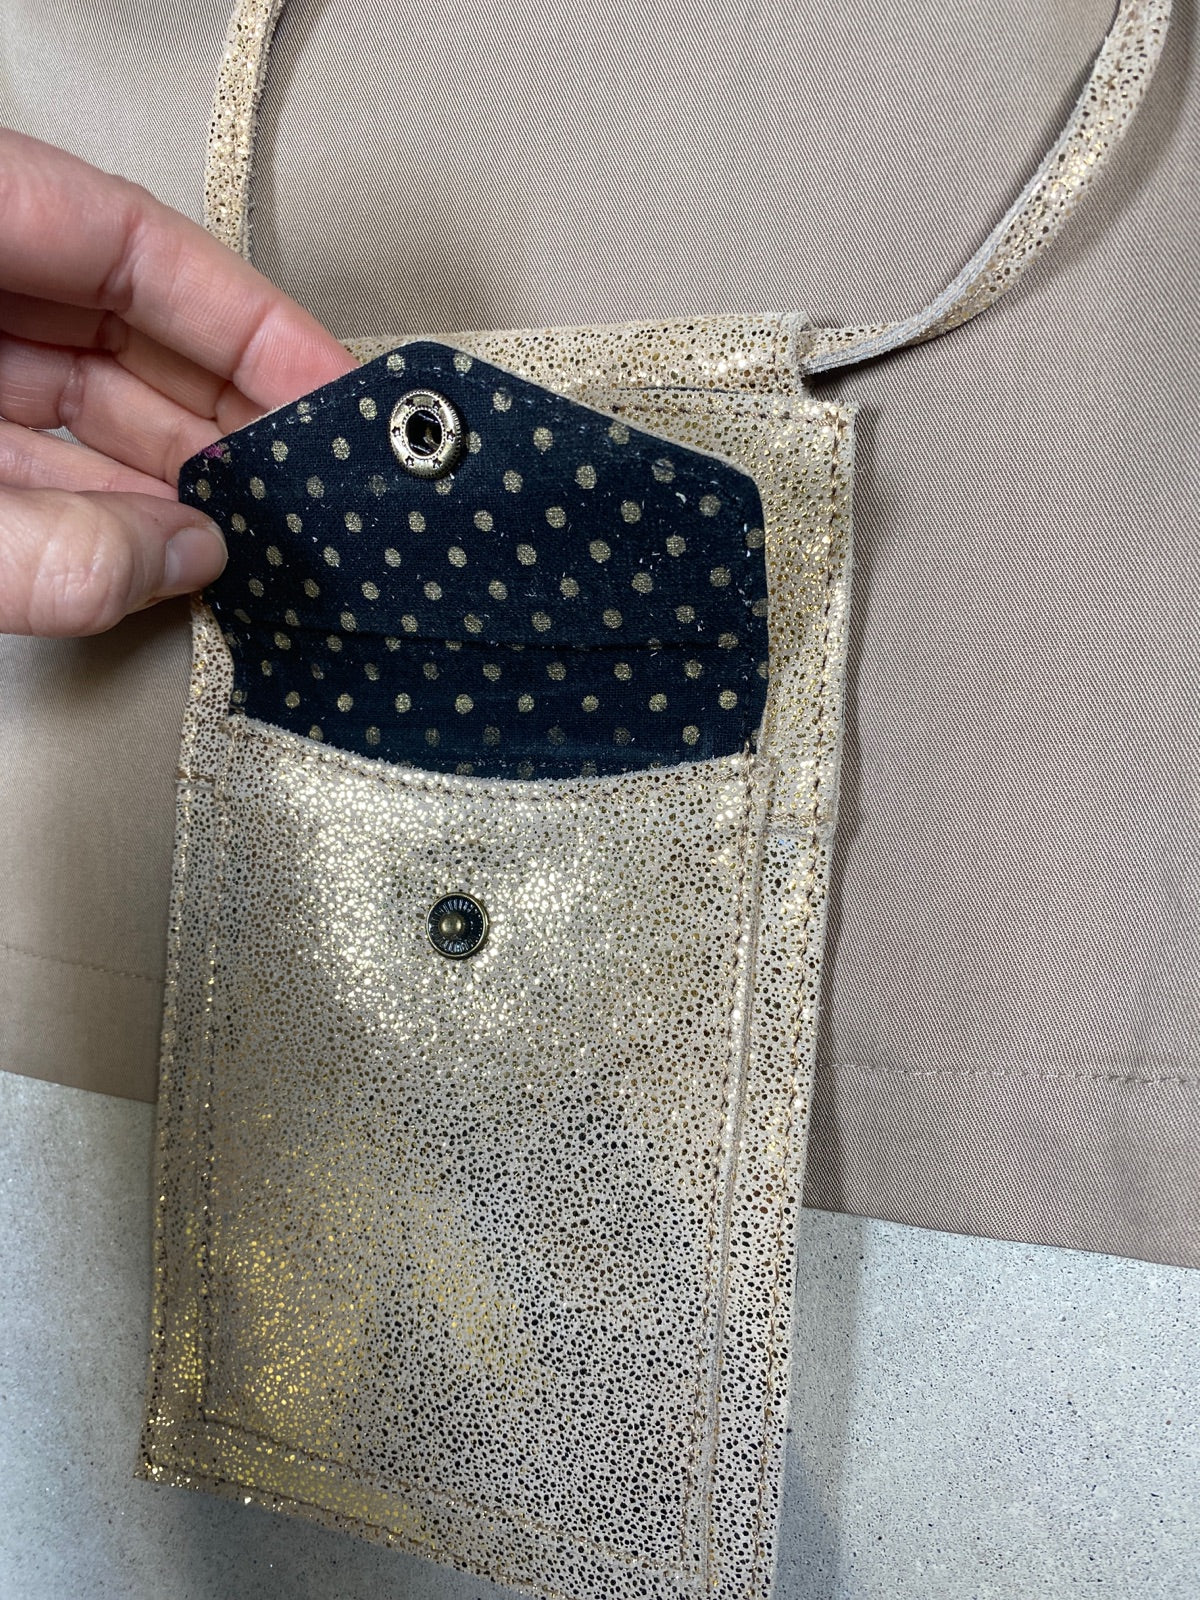 Pckani Leather Phone Bag Gold Snow